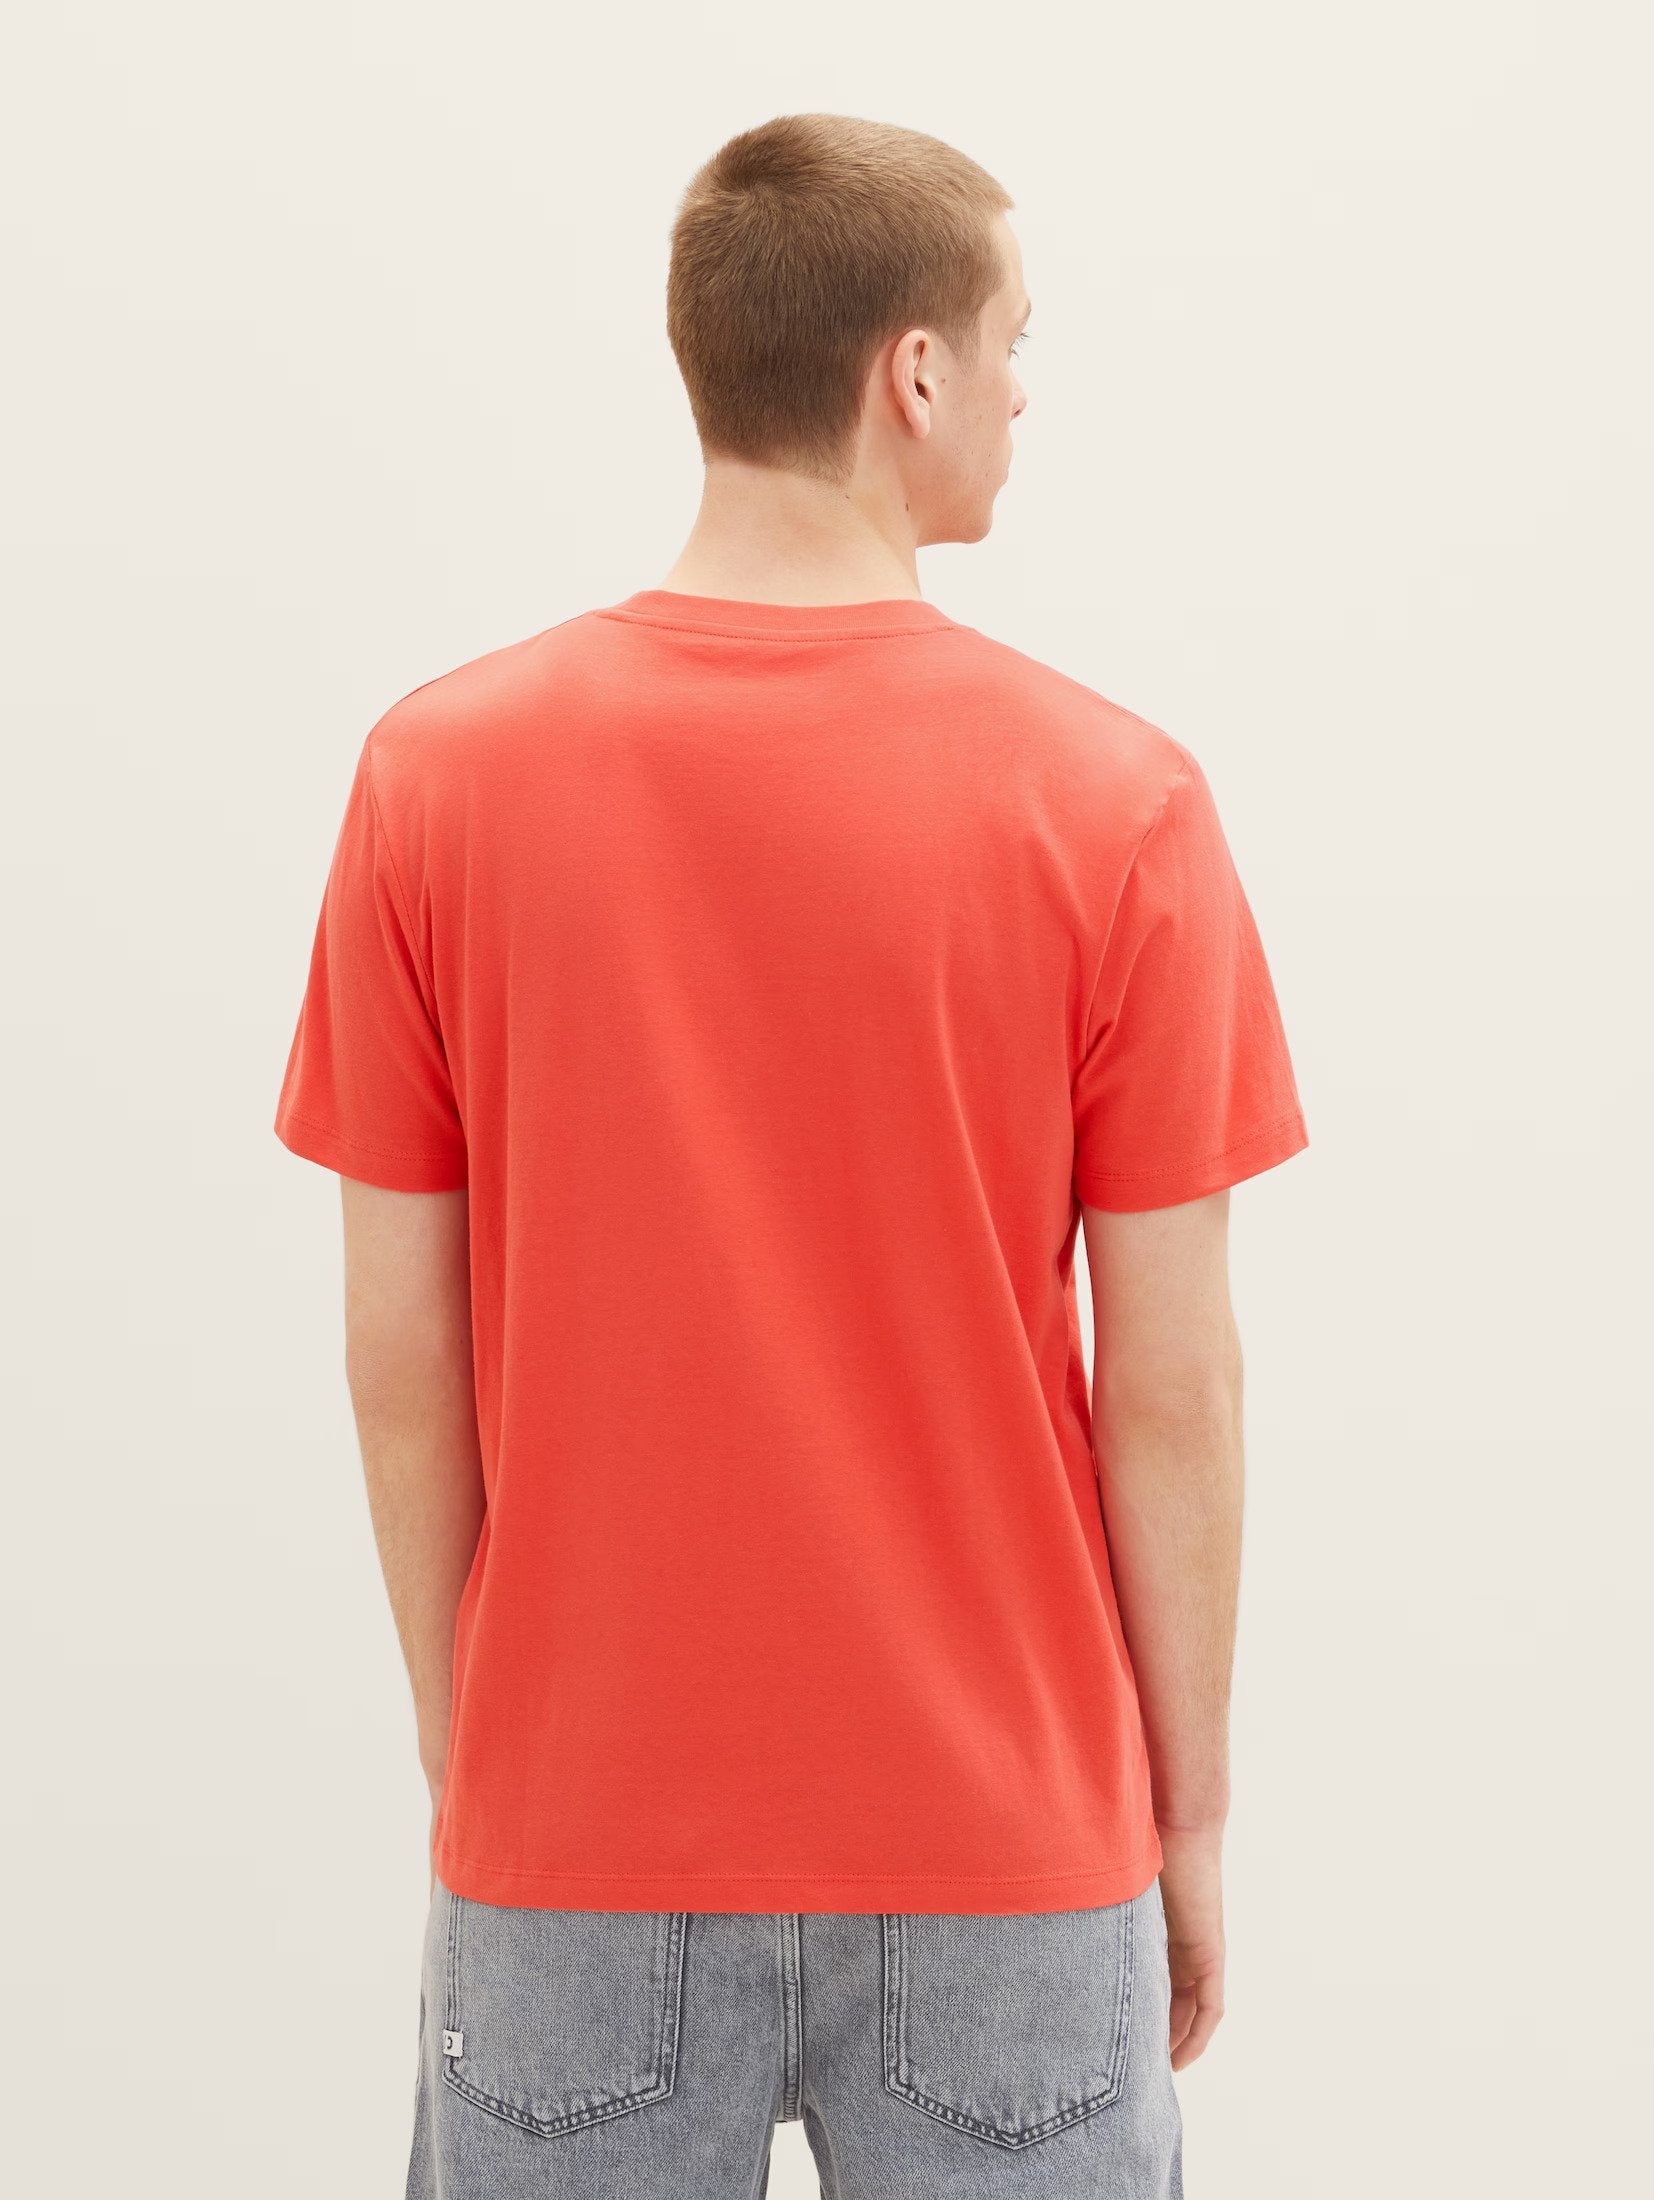 Tom Tailor Red T-shirt With Tennis Design